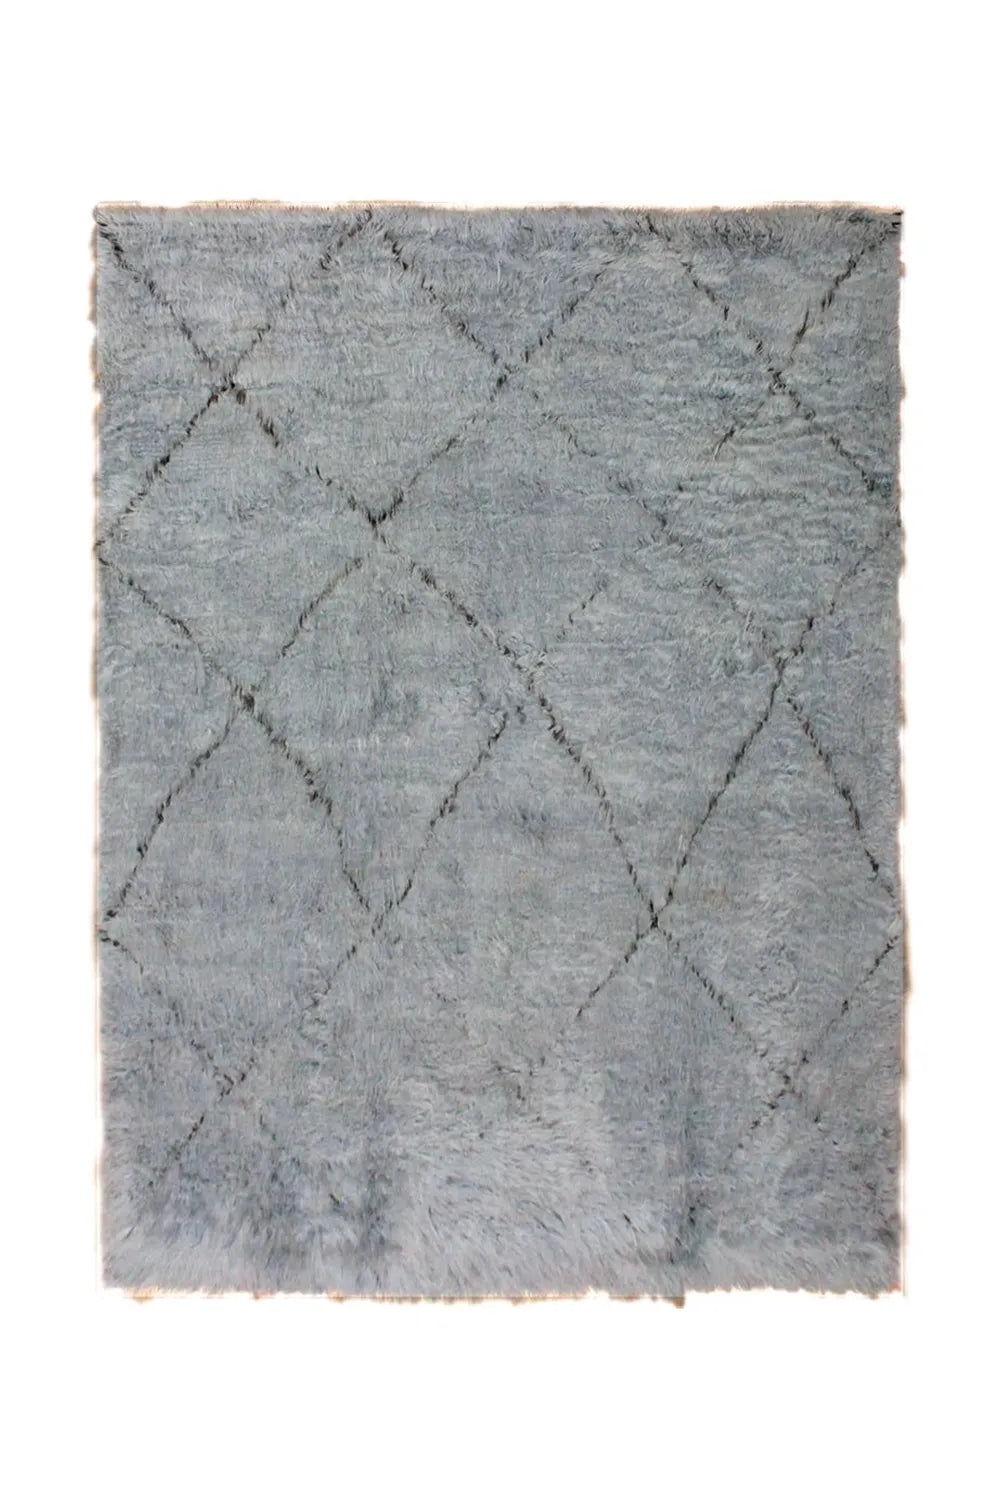 Plush gray shag rug with a subtle diamond pattern, adding a touch of luxury to any room.